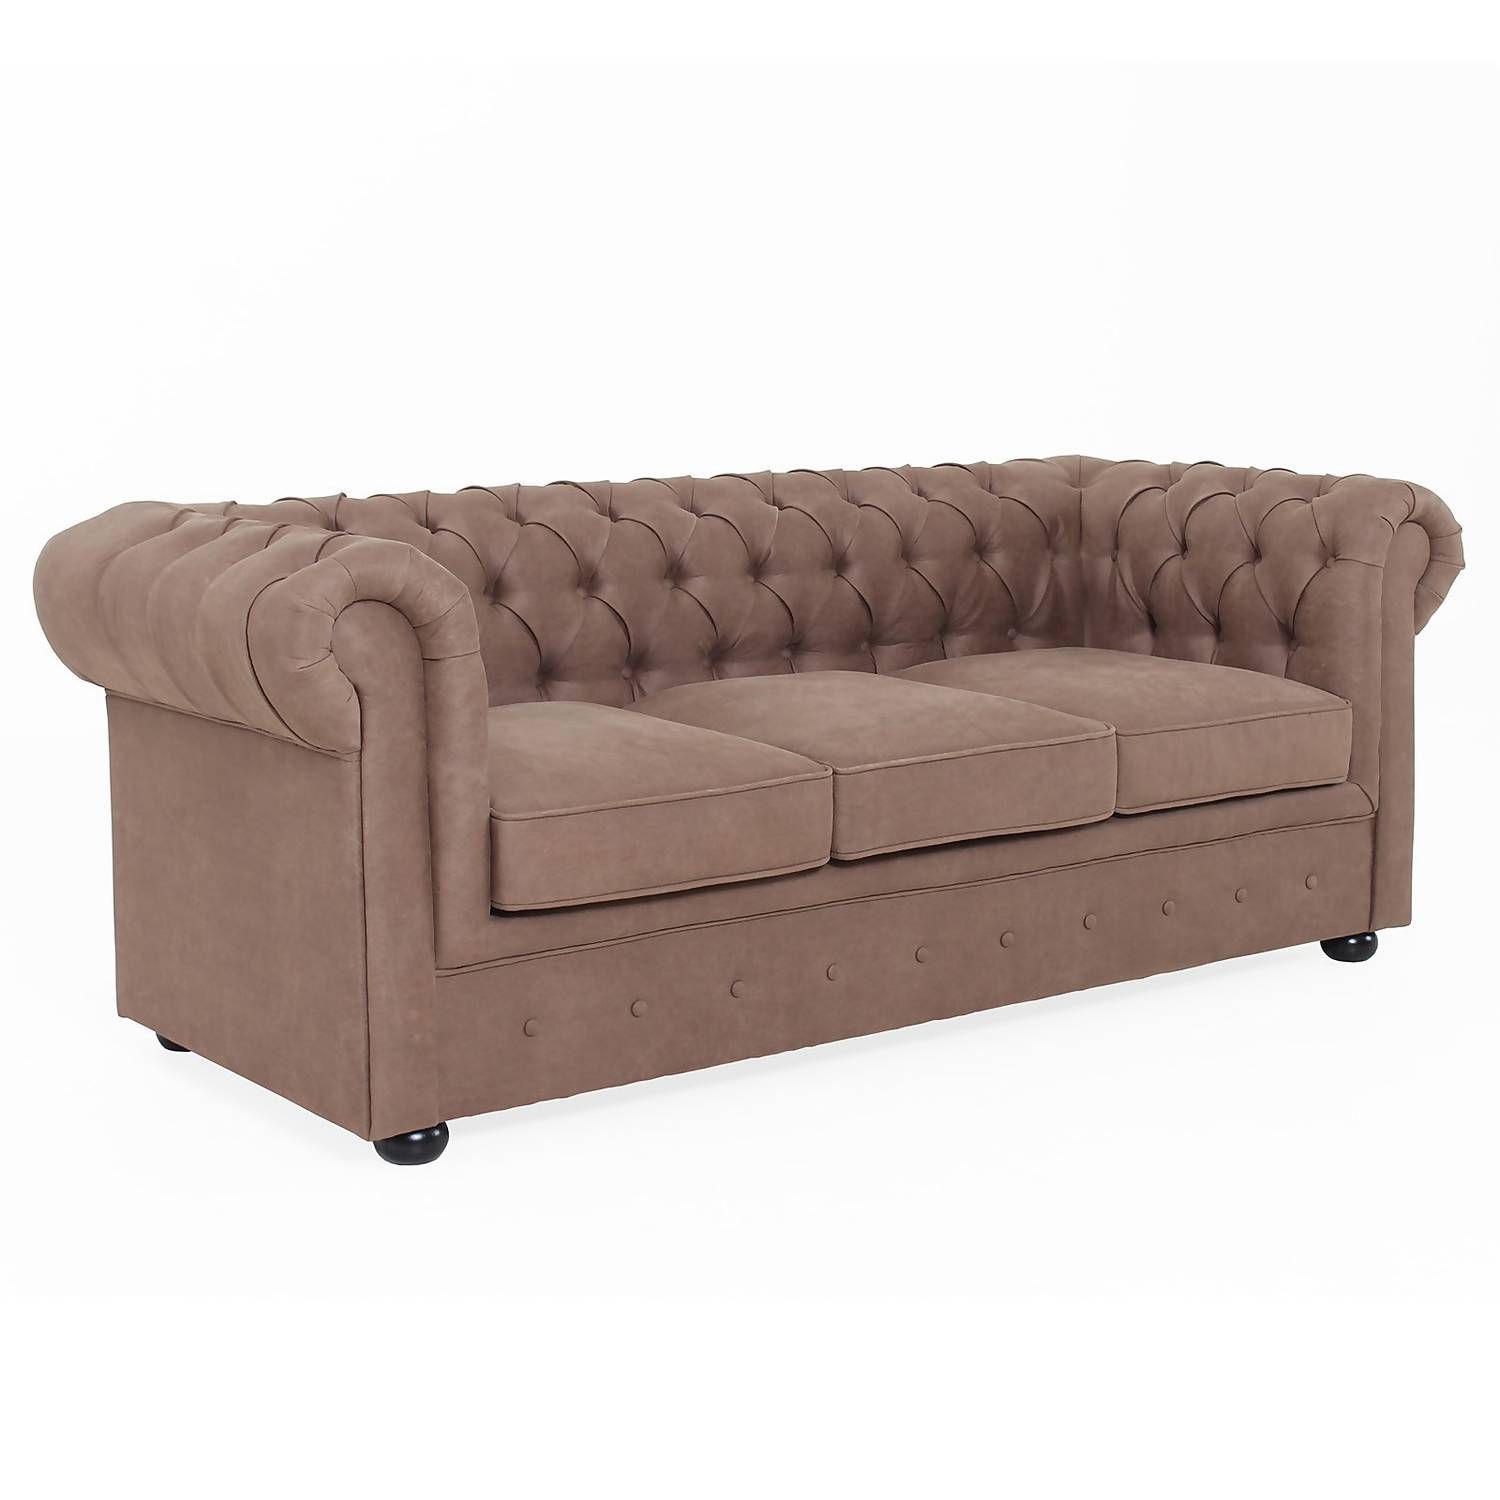 Chesterfield Faux Leather 3 Seater Sofa – Tan | Homebase Regarding Traditional 3 Seater Faux Leather Sofas (Photo 13 of 15)